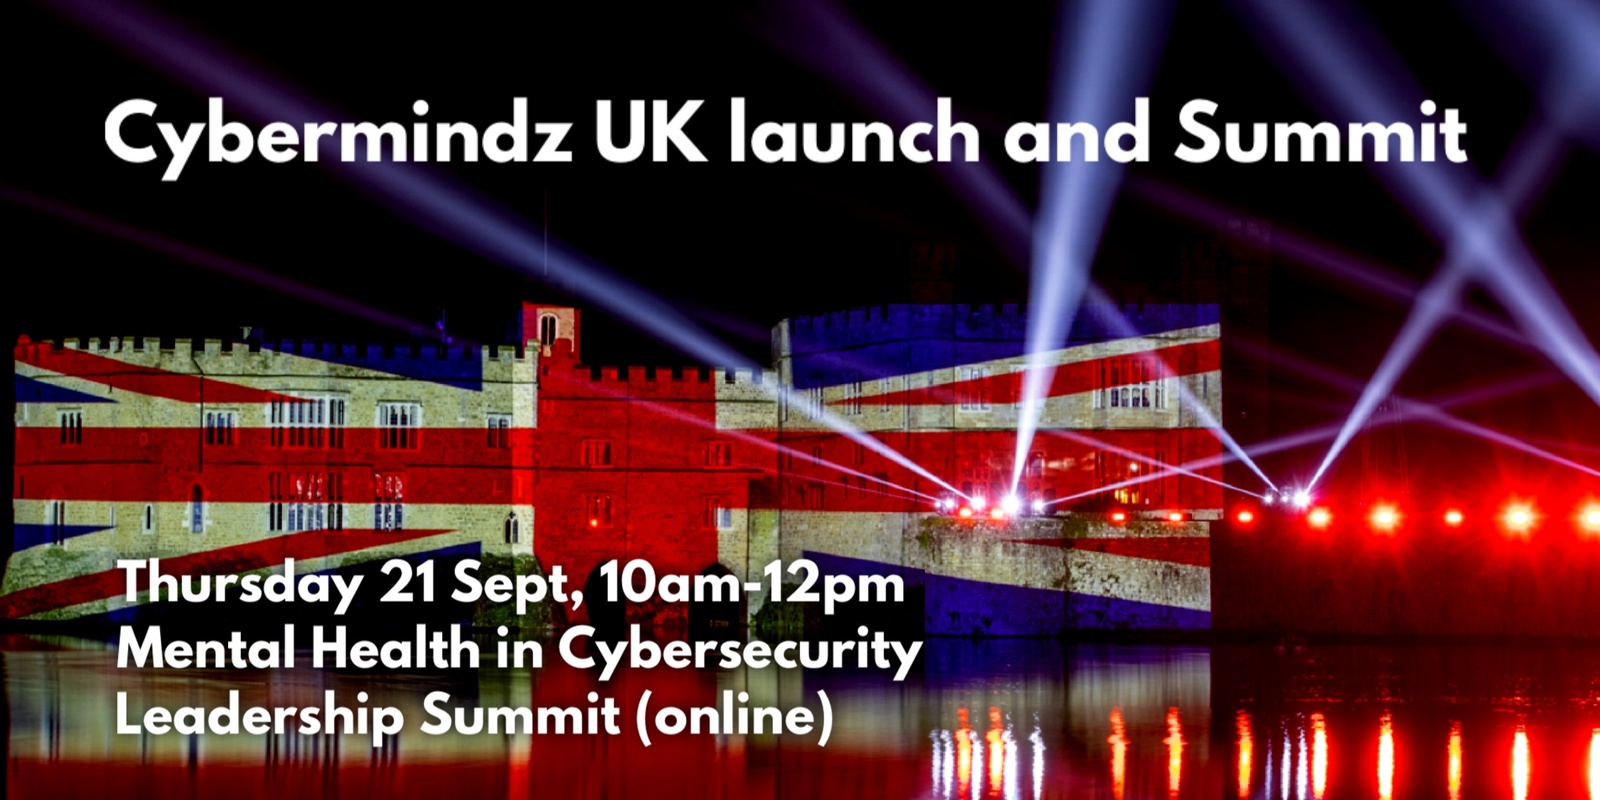 Banner image for UK Mental Health in Cybersecurity Leadership Summit + UK launch of Cybermindz